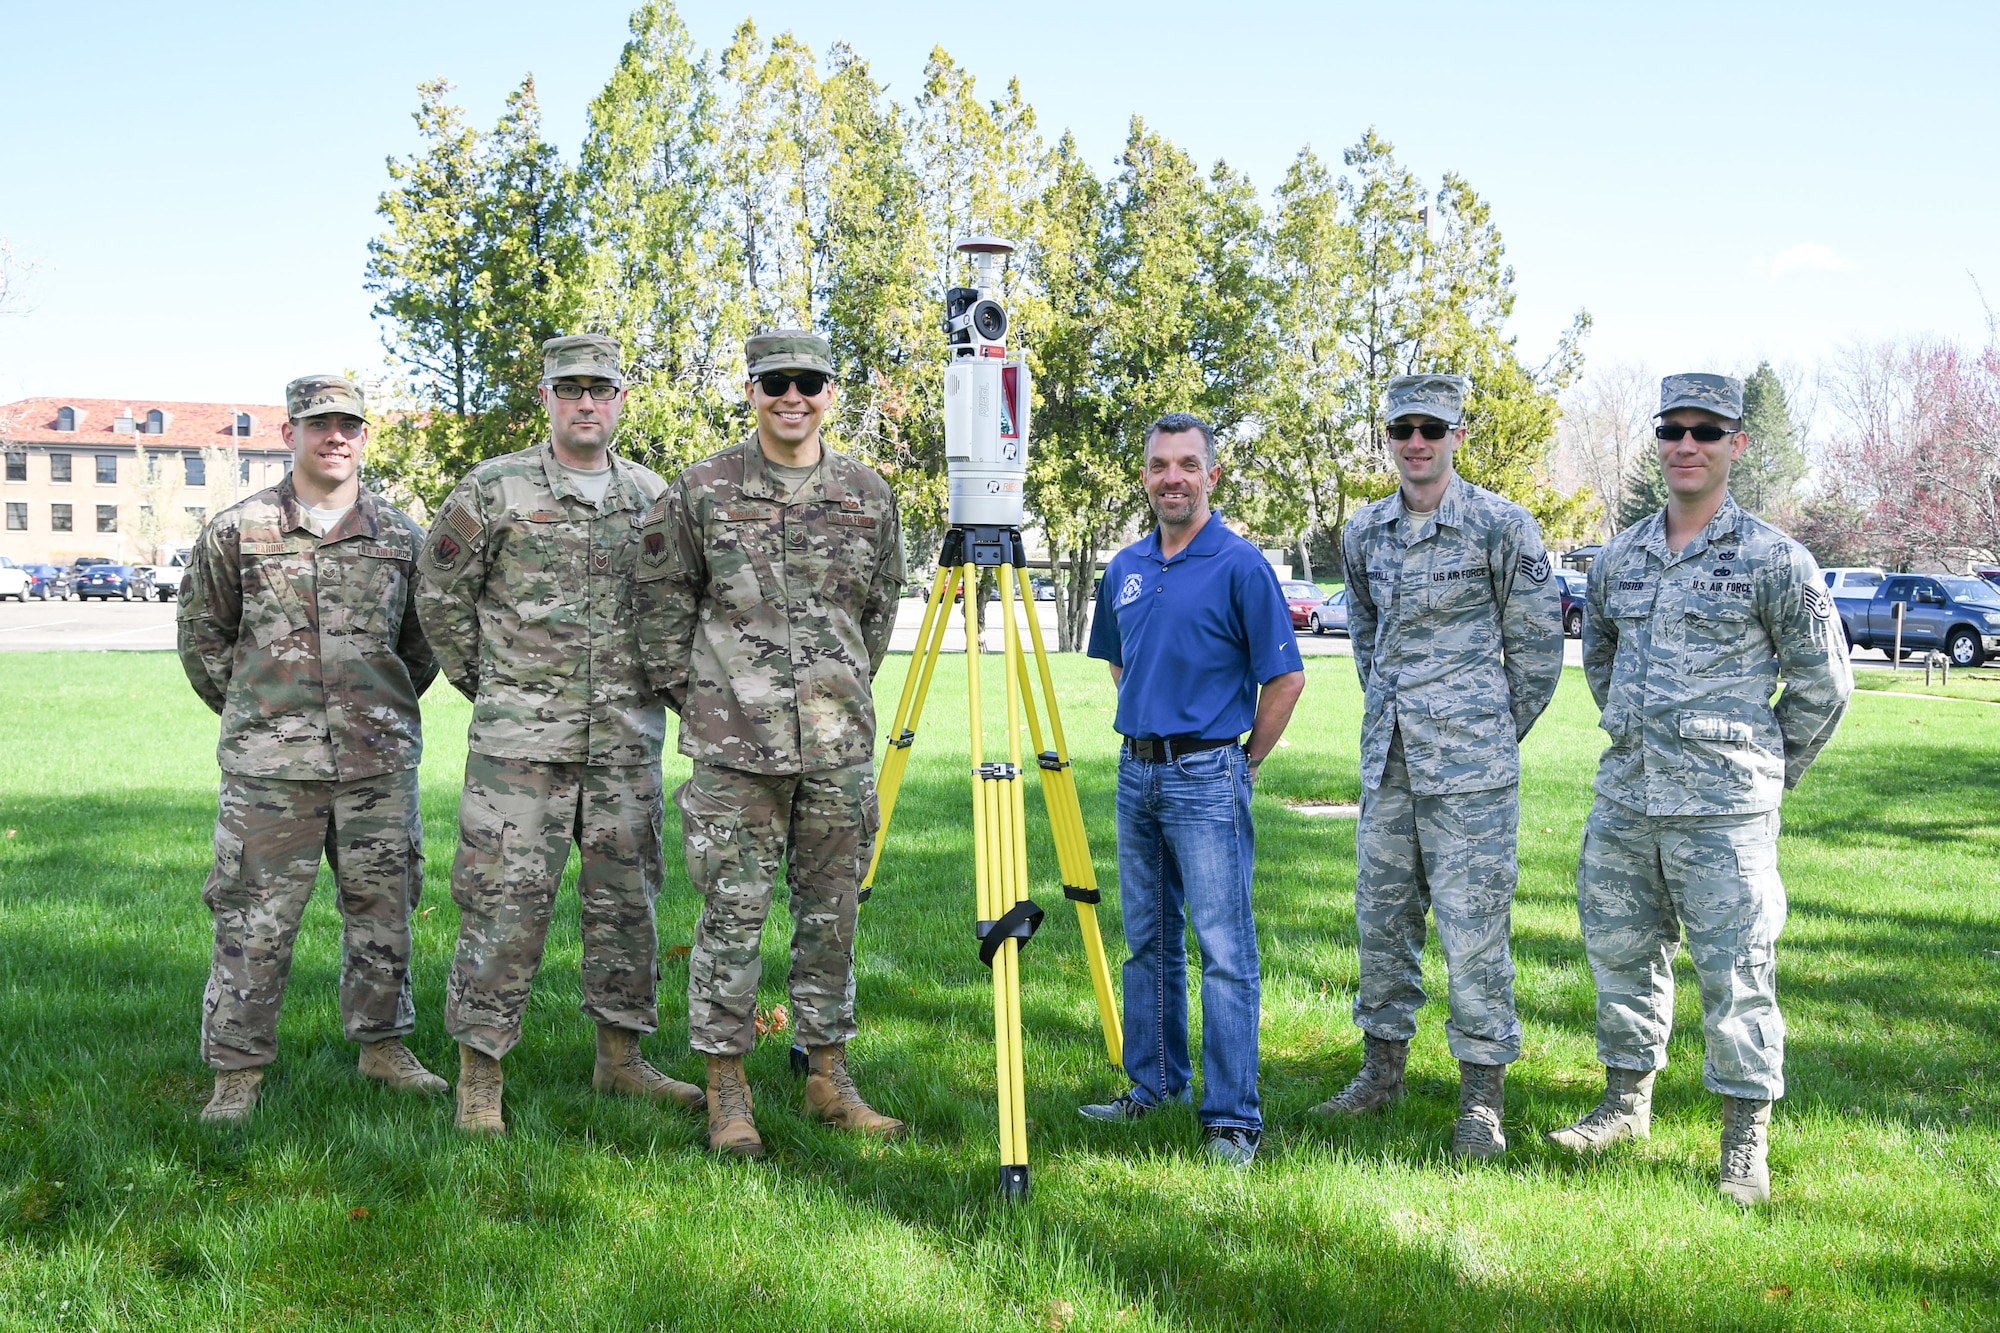 The 84th Radar Evaluation Squadron's Radar Survey Section from left to right: Staff Sgt. Ian Barone, Tech. Sgt. Chris Lange, Tech. Sgt. Adam Borjon, Jason Kaas, Staff Sgt. Austin Marshall, and Staff Sgt. Adam Foster. The team recently received two 3-D terrestrial laser scanners for faster and more accurate surveys around radar sites.(U.S. Air Force photo by Cynthia Griggs)